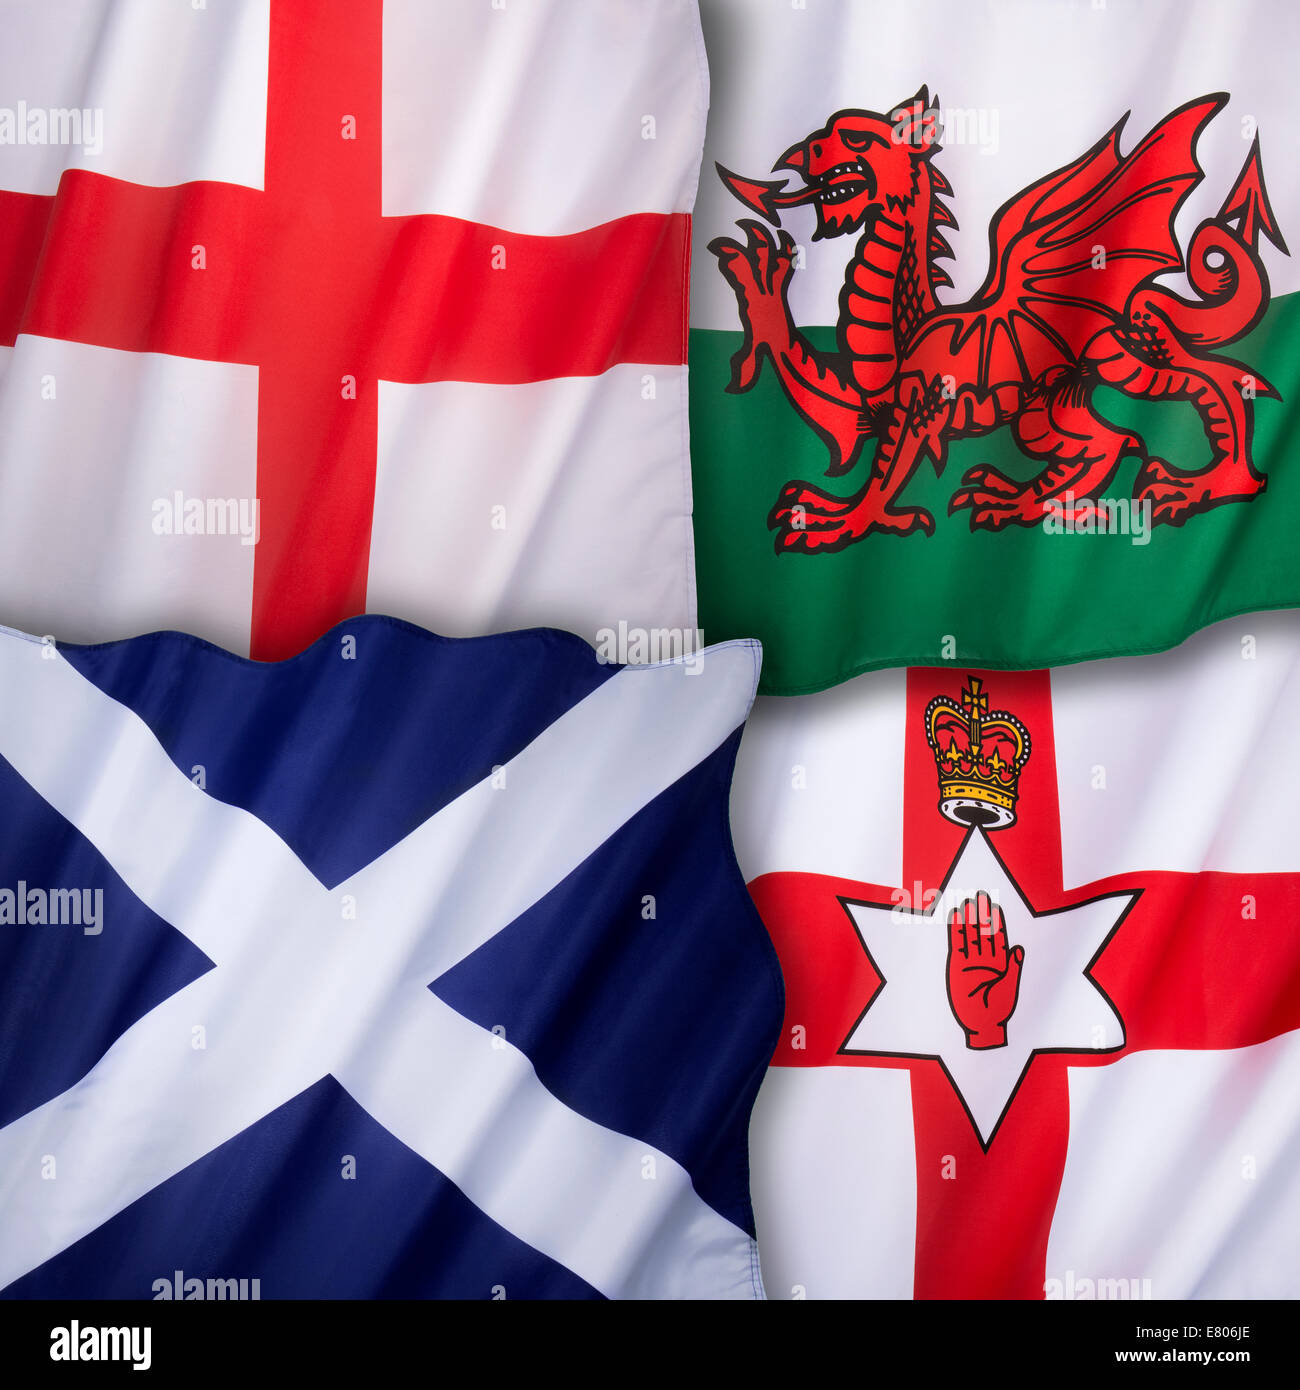 Flags of the United Kingdom of Great Britain - England, Scotland, Wales, Northern Ireland Stock Photo